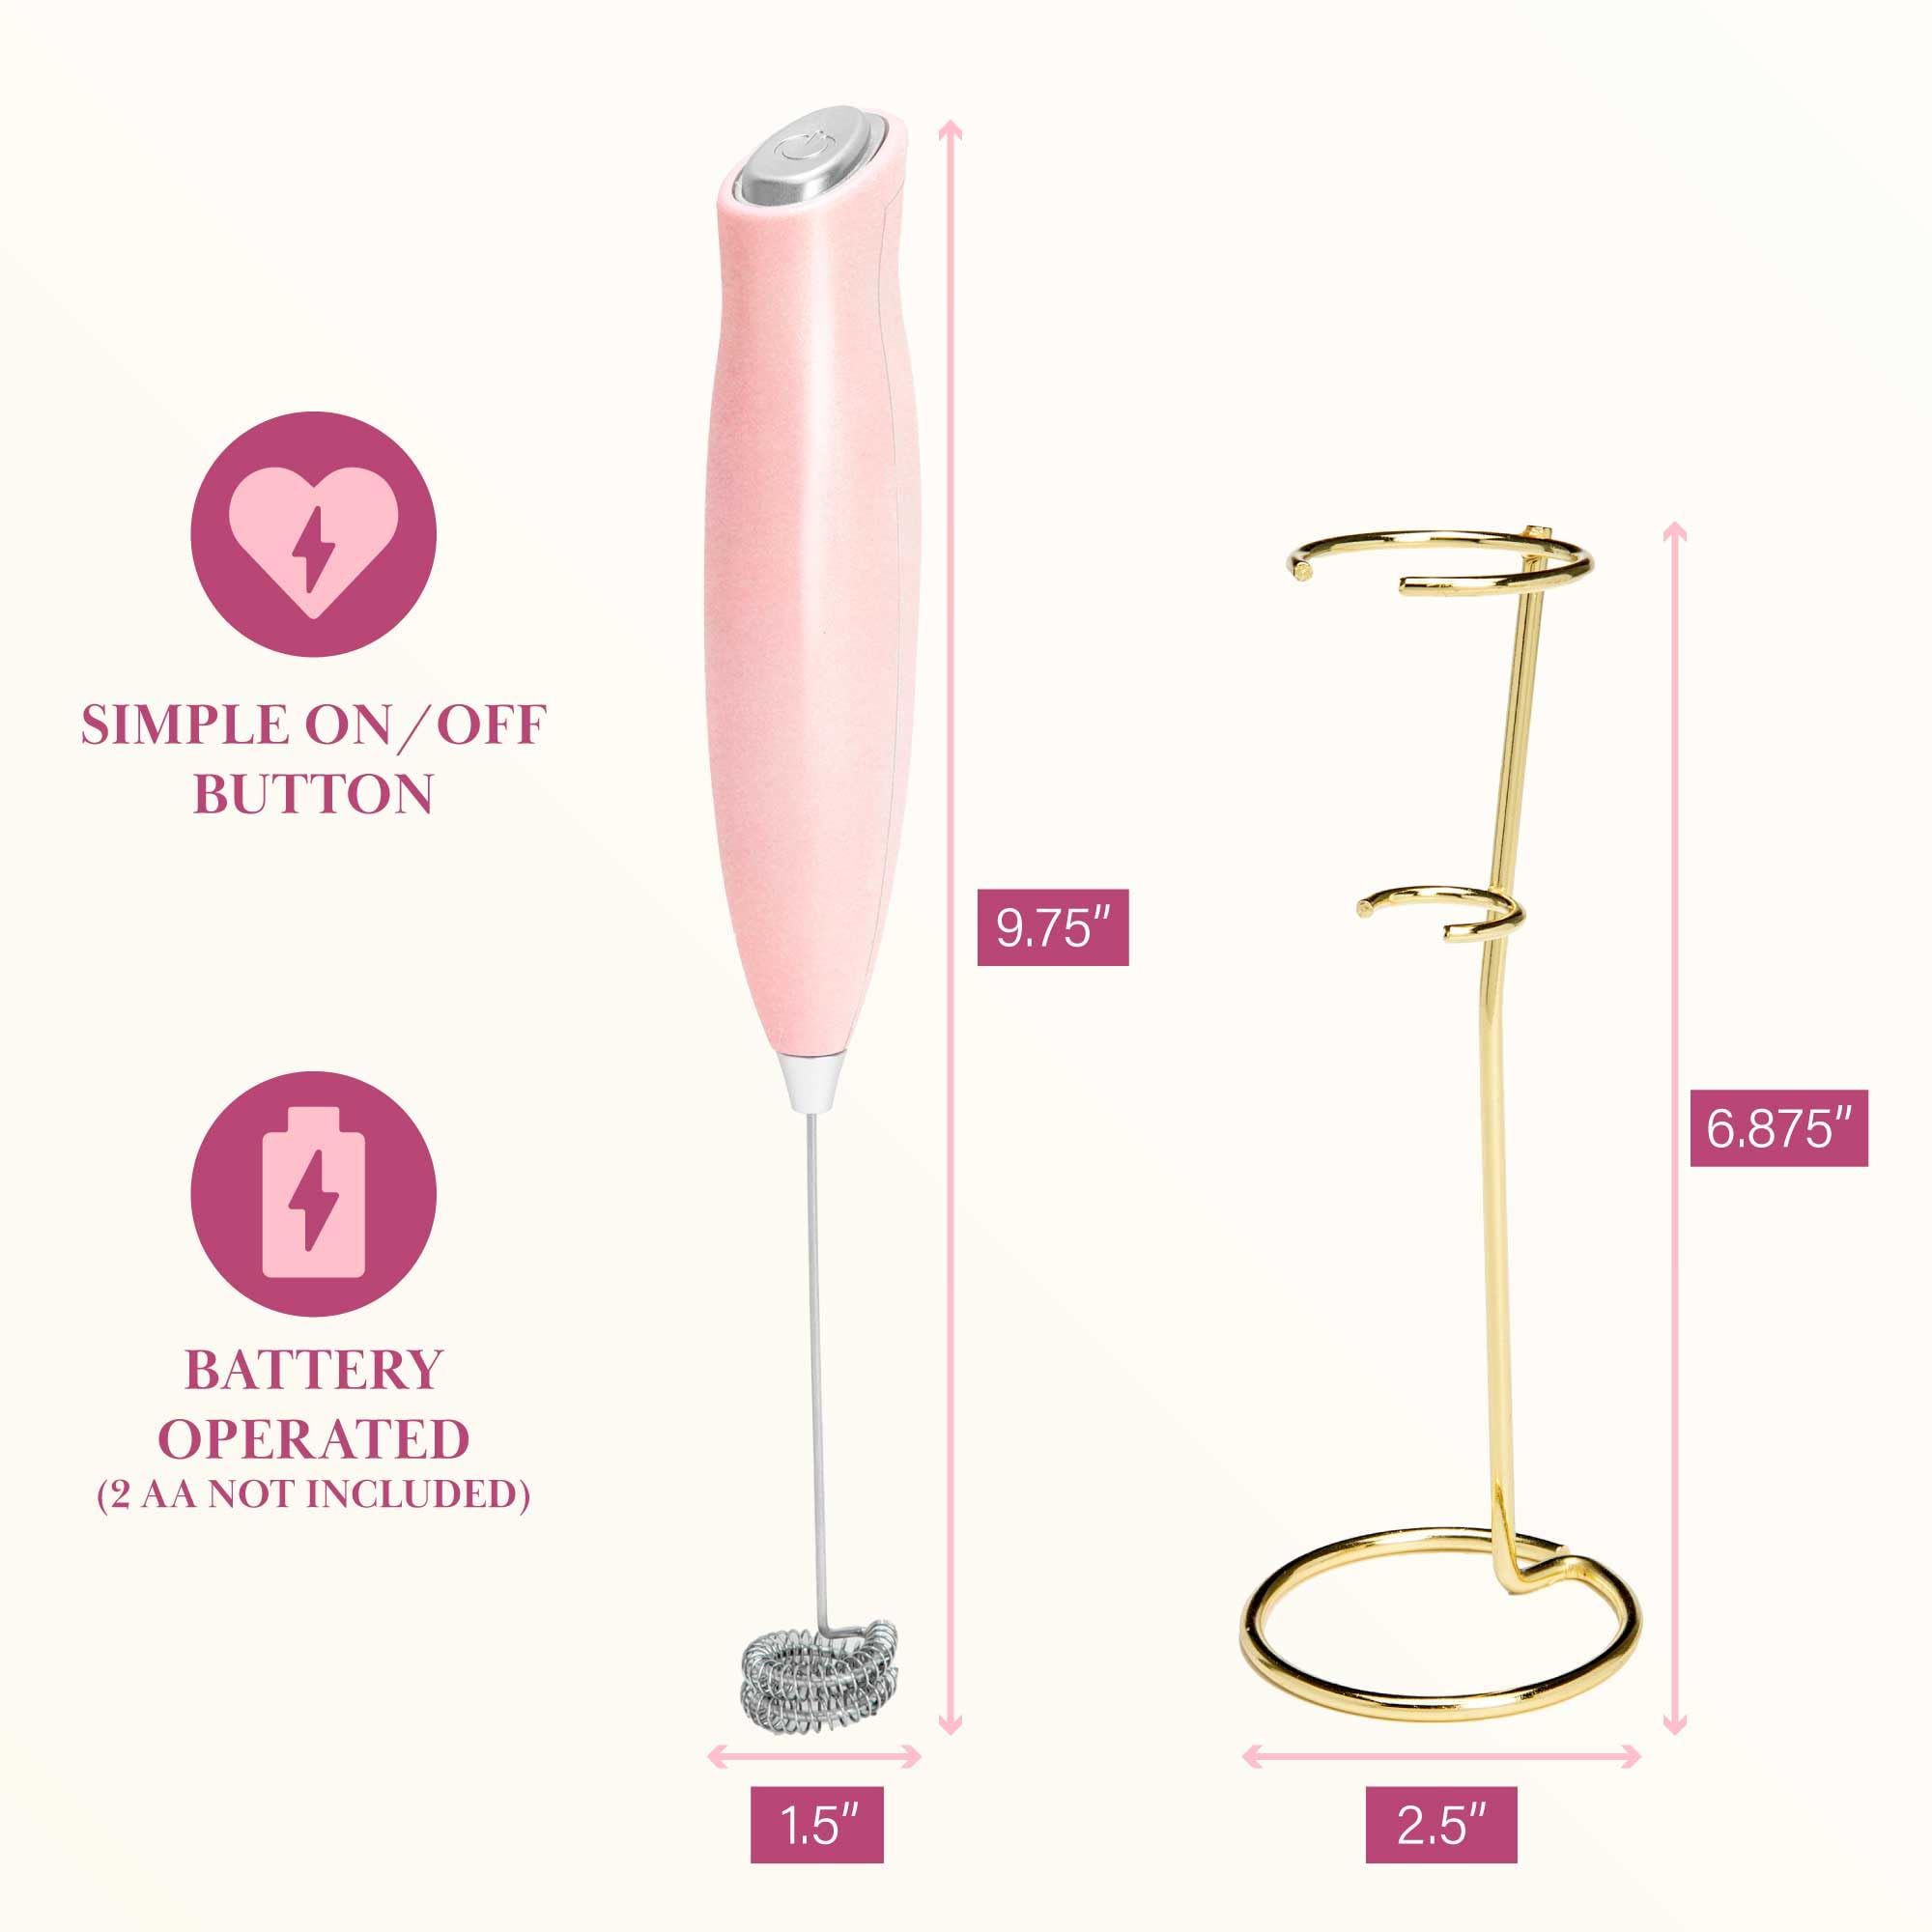 Paris Hilton Electric Handheld Milk Frother with Double Coil Head Whisk and Gold Metal Stand, Battery Powered (2 AA Batteries Required but Not Included), Pink Sparkle Finish